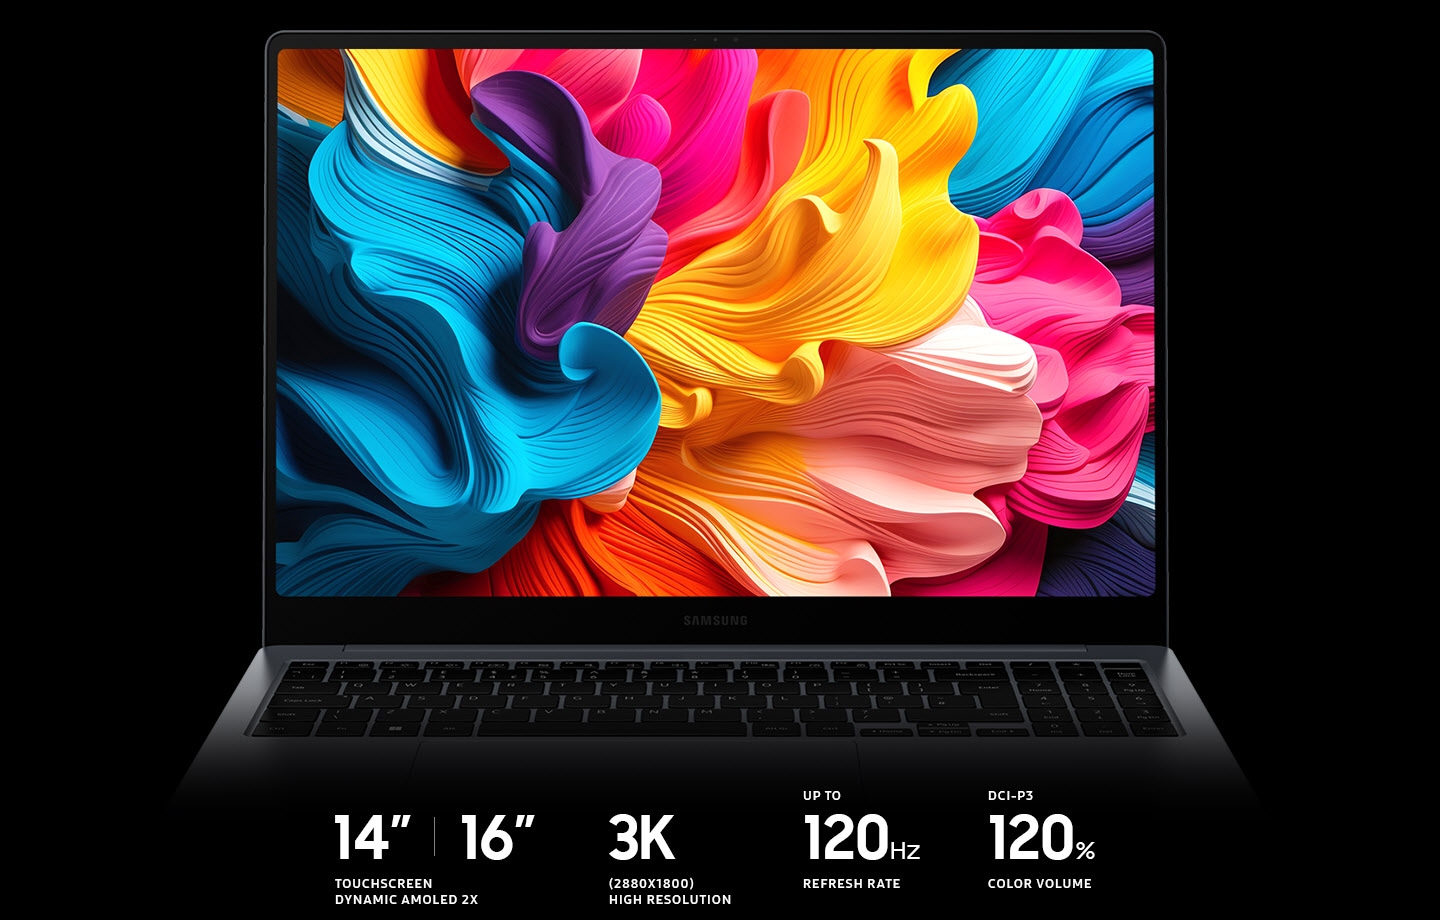 Galaxy Book4 Pro in Moonstone Gray is open, facing forward with a colorful wallpaper onscreen. 14-INCH or 16-INCH TOUCHSCREEN DYNAMIC AMOLED 2X. 3K (2880X1800) HIGH RESOLUTION. UP TO 120HZ REFRESH RATE. DCI-P3 120% COLOR VOLUME.